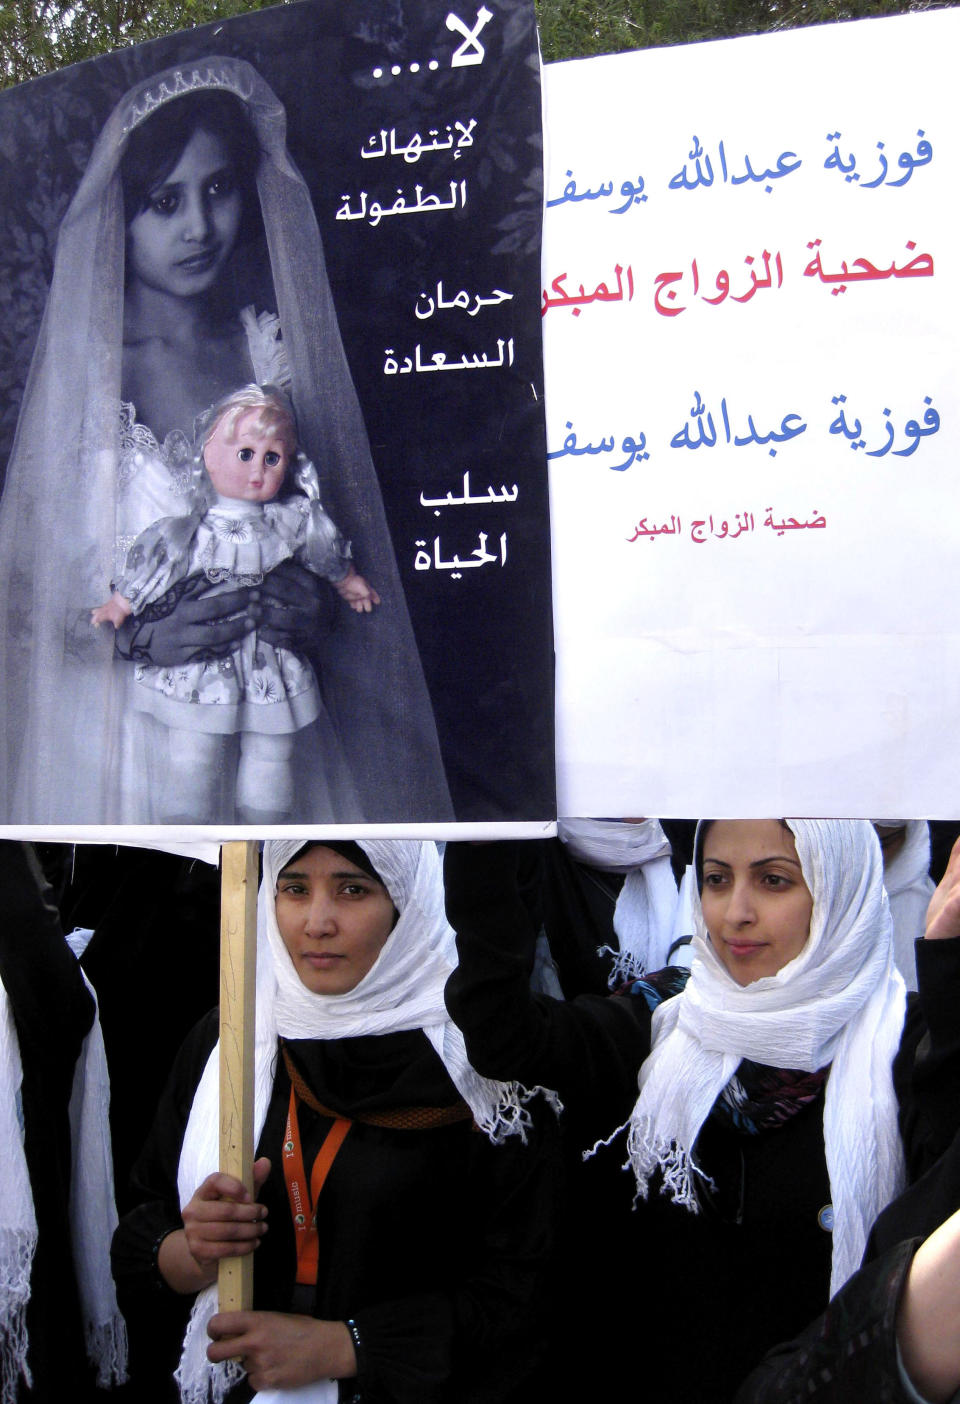 FILE - In this Tuesday, March 23, 2010 file photo, Yemeni school students hold up posters denouncing child marriage, as they take part in a protest outside the parliament in Sanaa, Yemen. In the Middle East, Saudi Arabia and Yemen are the only Arab countries that do not have laws that set a minimum age for marriage. According to a December 2011 Human Rights Watch report, approximately 14 percent of girls in the Arab world’s poorest nation of Yemen were married before the age 15, and 52 percent were married before 18 years old. Arabic reads, "no for killing childhood " and "Fawzya Abdullah: a victim of underage marriage." (AP Photo, File)